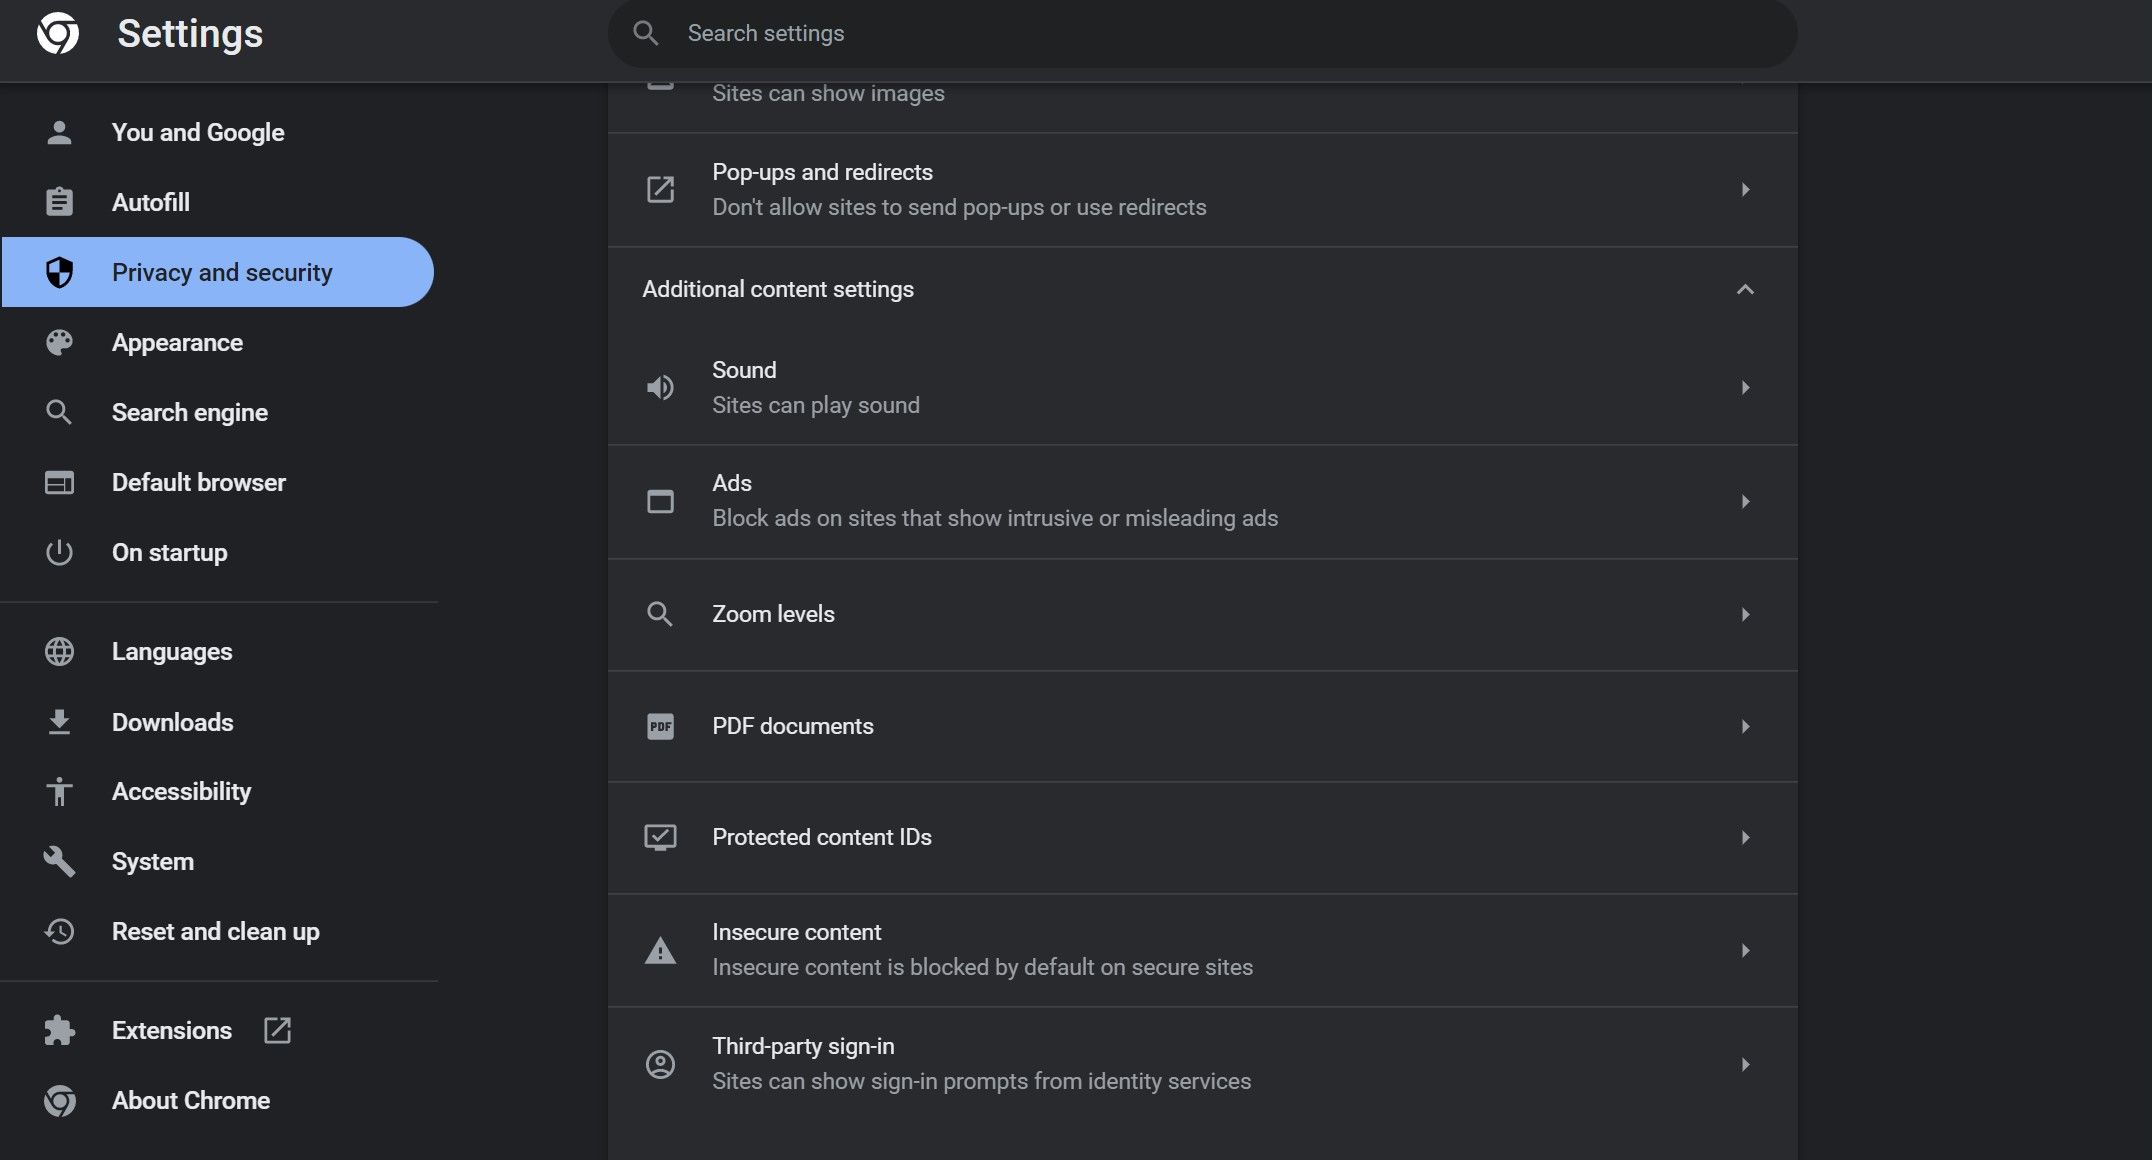 Open sound settings in Chrome